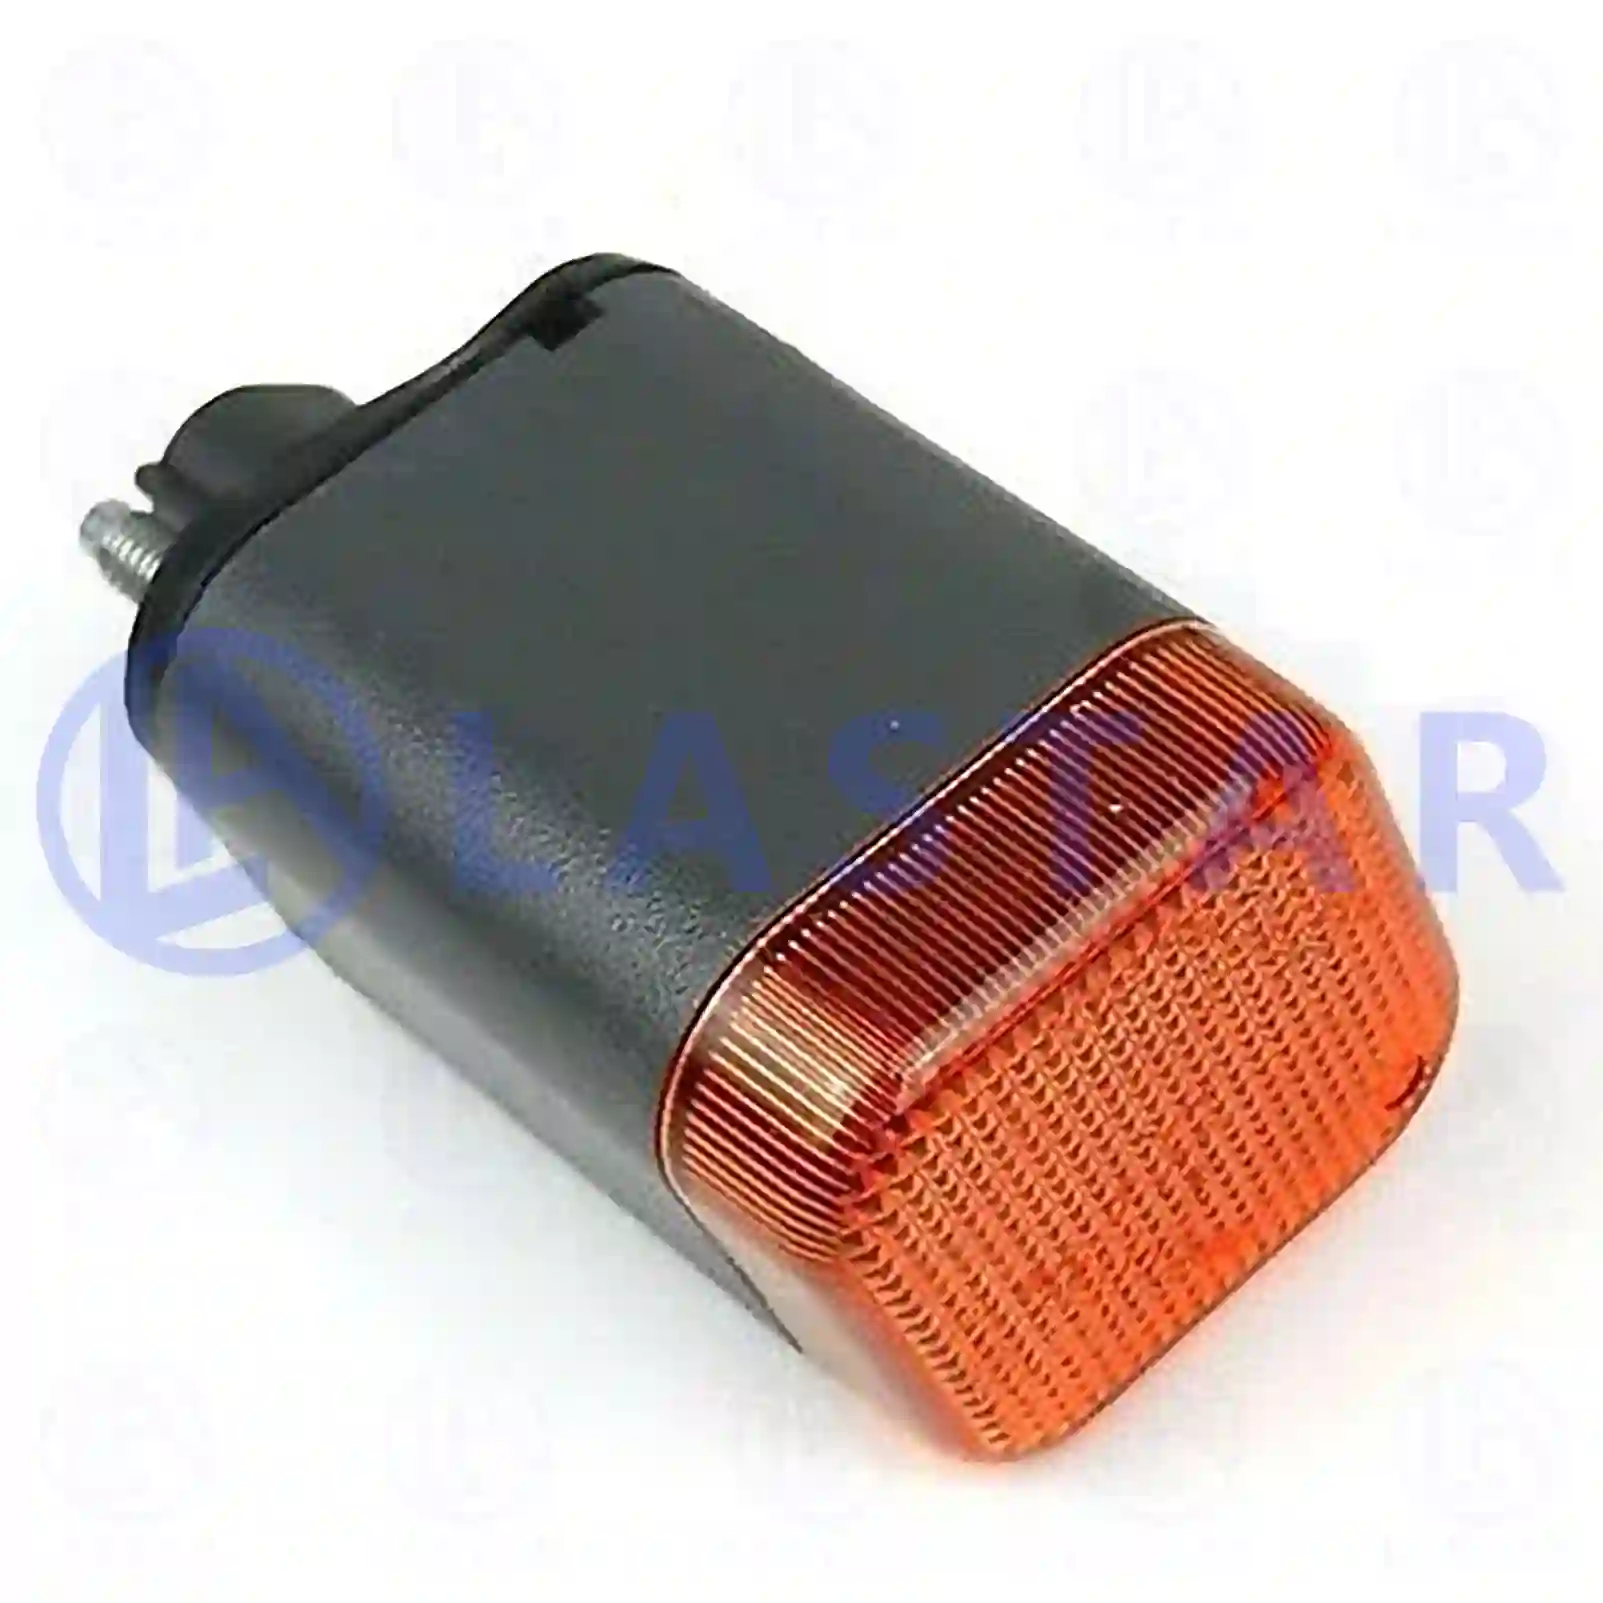 Side marking lamp, 77713001, 99452662, ZG20867-0008 ||  77713001 Lastar Spare Part | Truck Spare Parts, Auotomotive Spare Parts Side marking lamp, 77713001, 99452662, ZG20867-0008 ||  77713001 Lastar Spare Part | Truck Spare Parts, Auotomotive Spare Parts